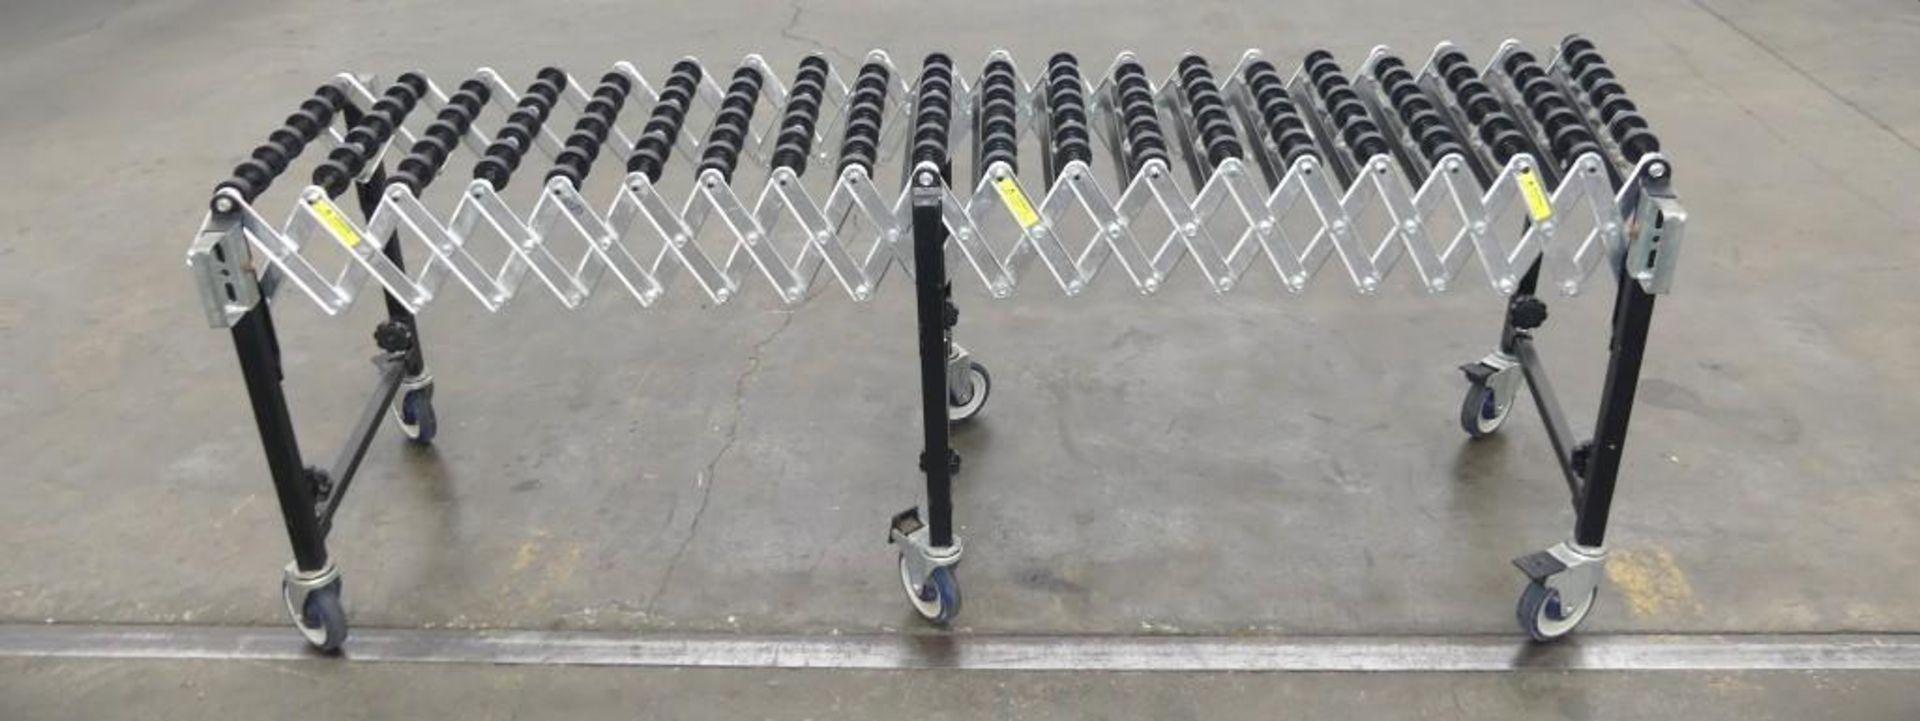 9' by 20" Accordion Style Skate Conveyor - Image 5 of 6